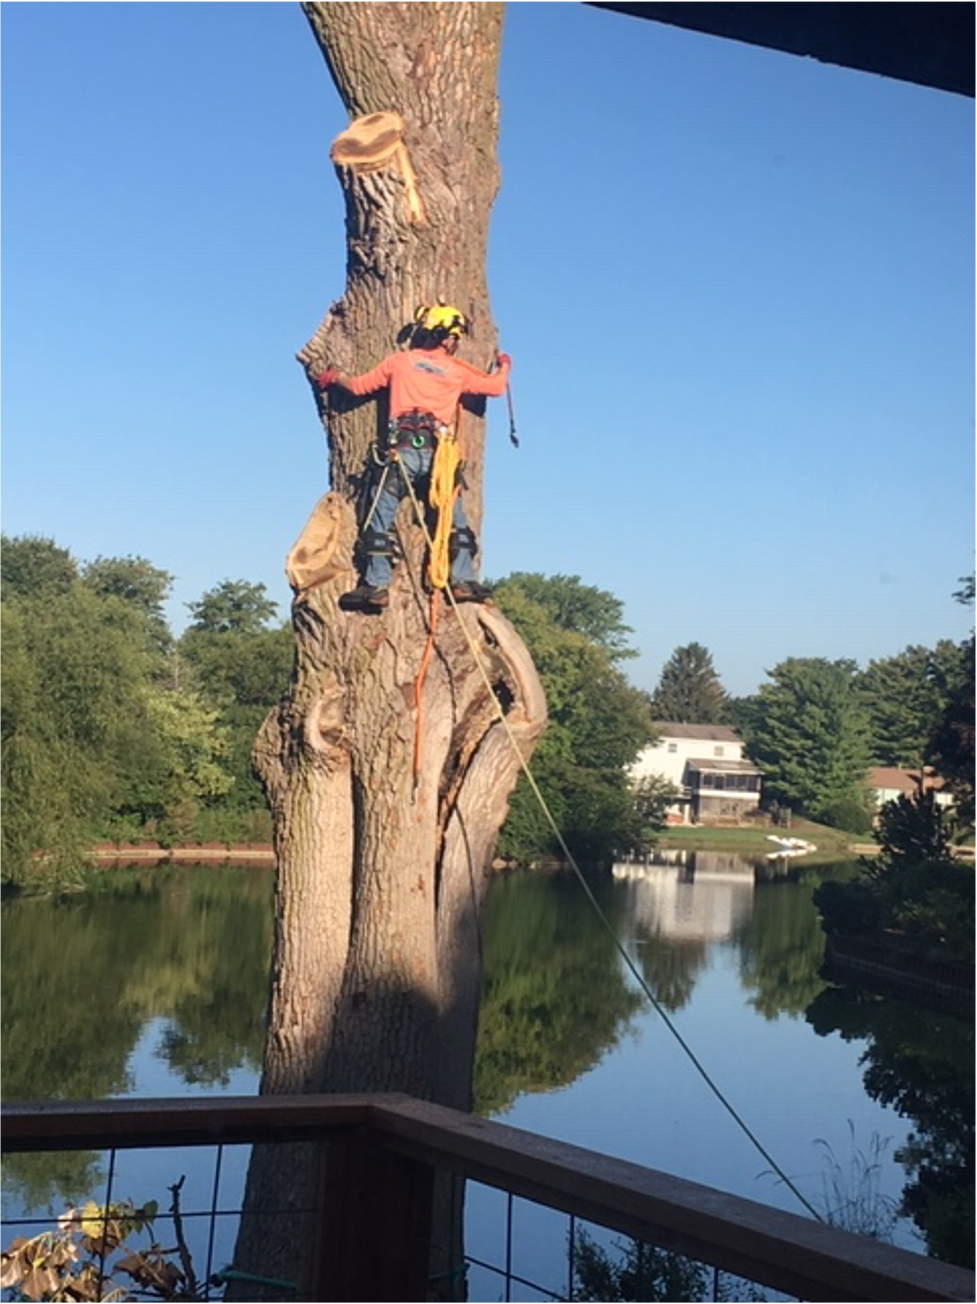 Monkey Business Tree Care Specialists provides professional tree services to the Lakeland area. From tree trimming to tree removal you can call us 24/7!